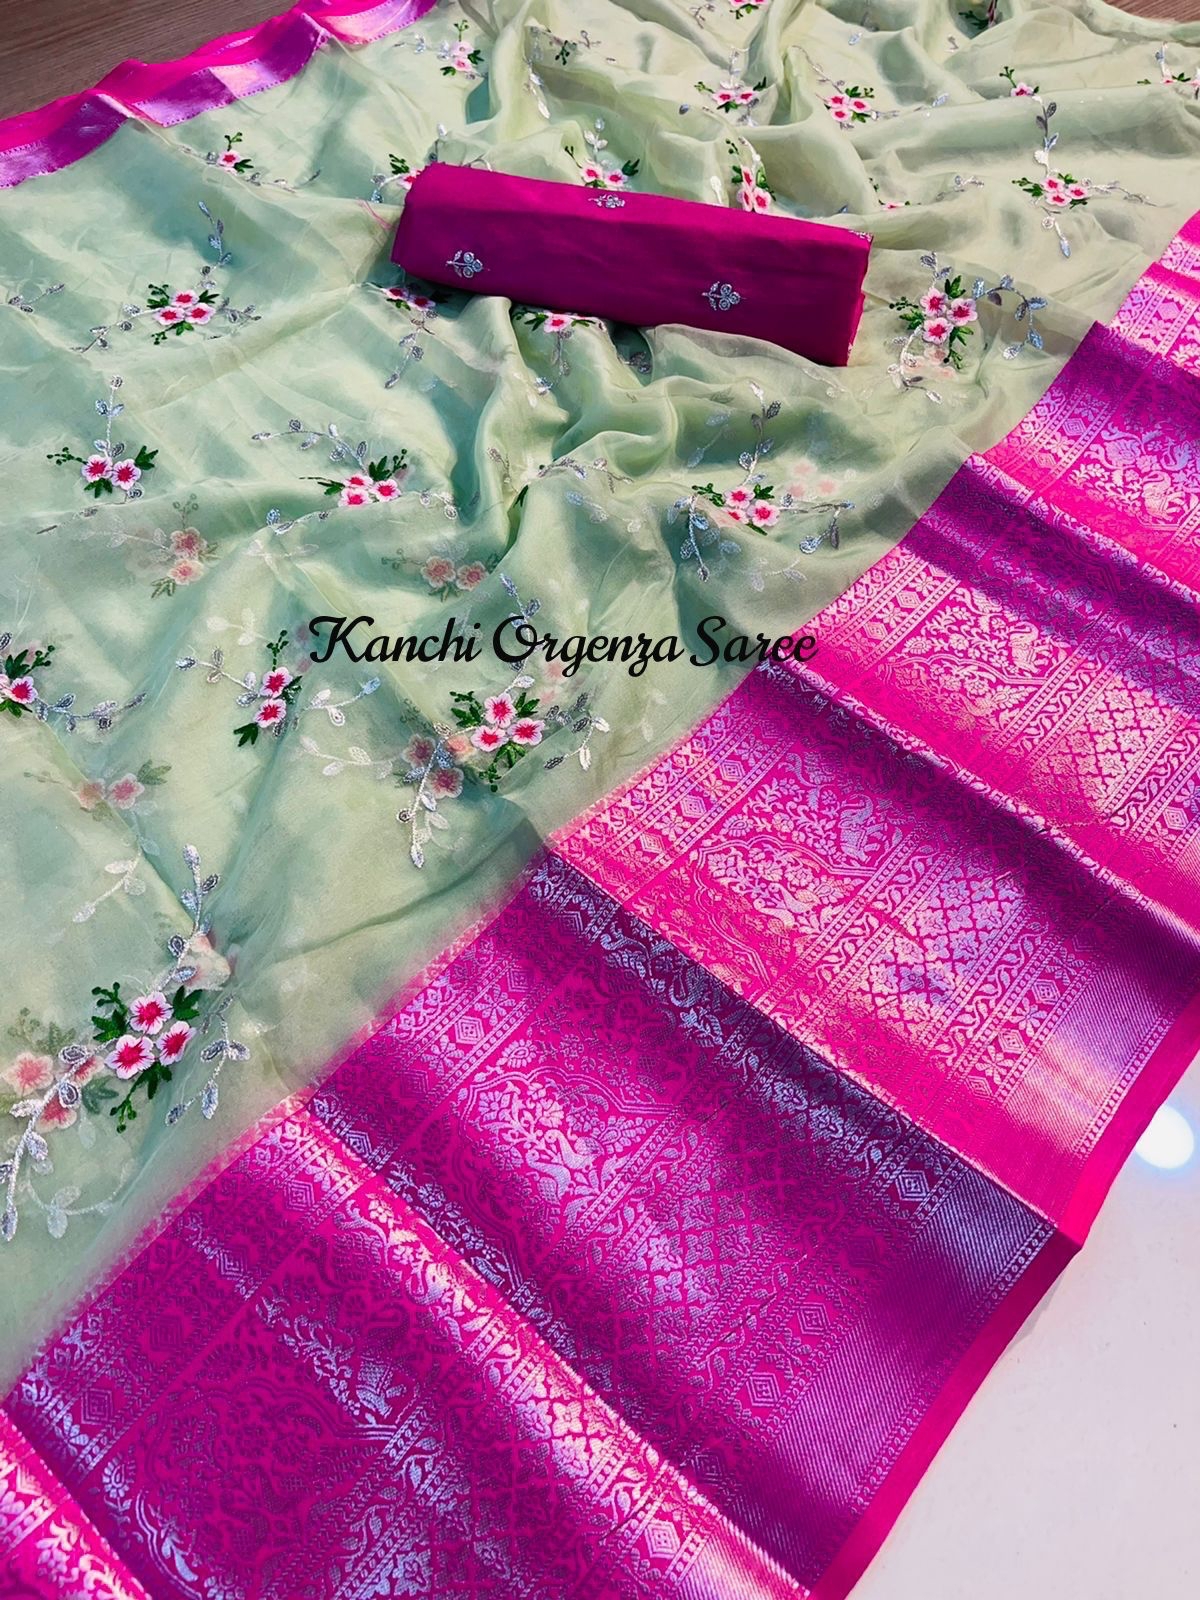 STEP MOUNT Pure Kanchi organza sarees with all over gold dollar butis